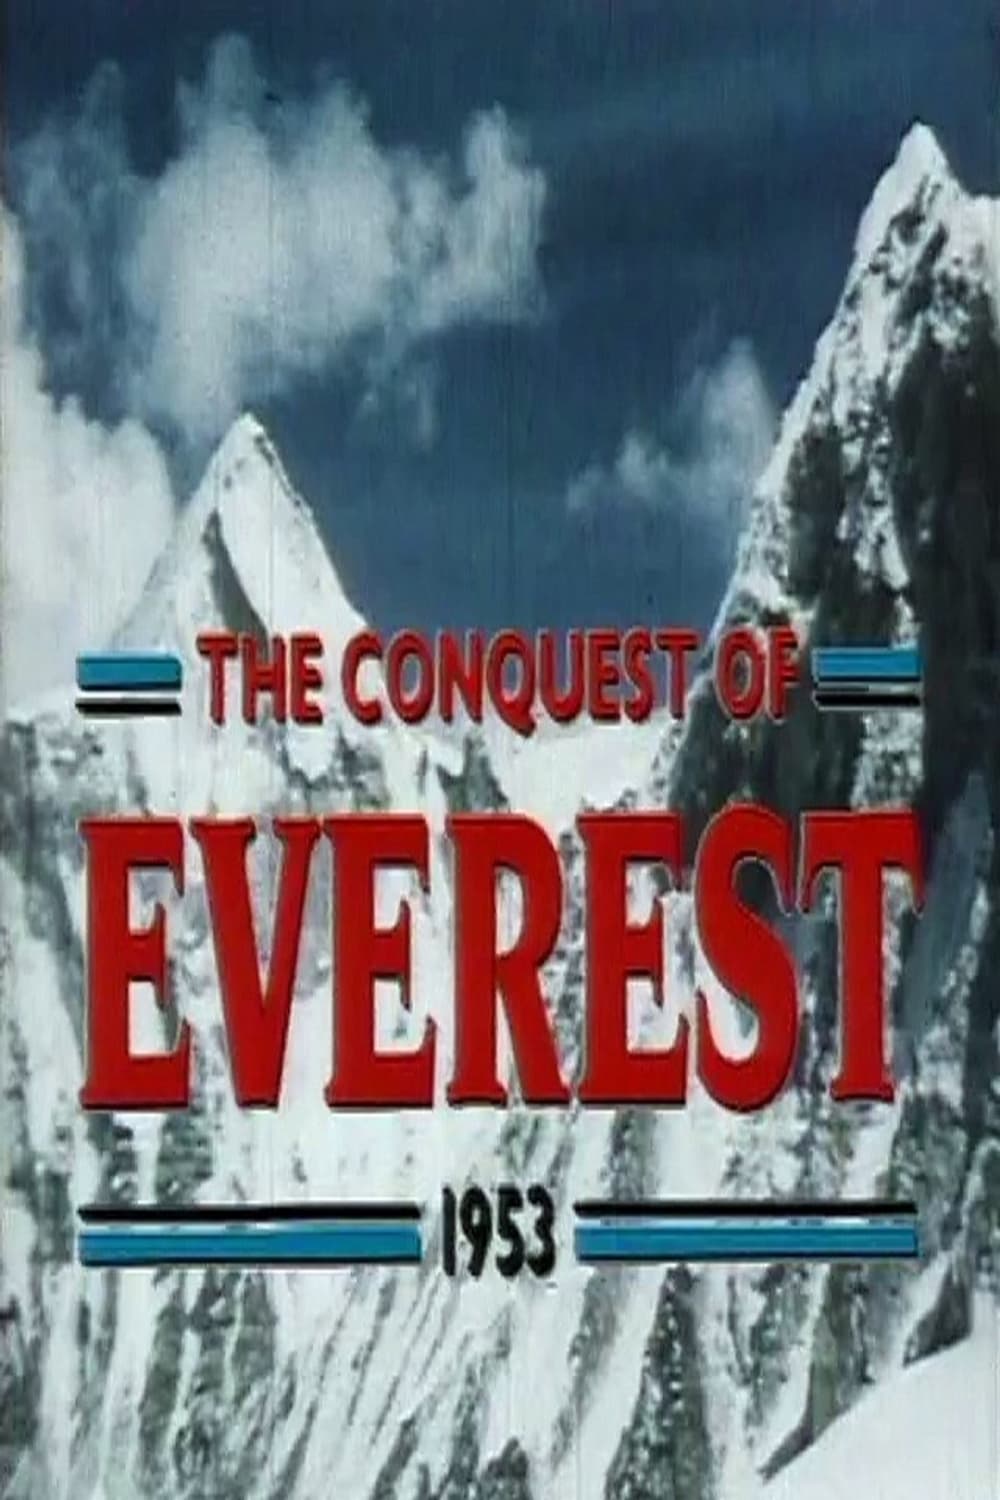 The Conquest of Everest 1953